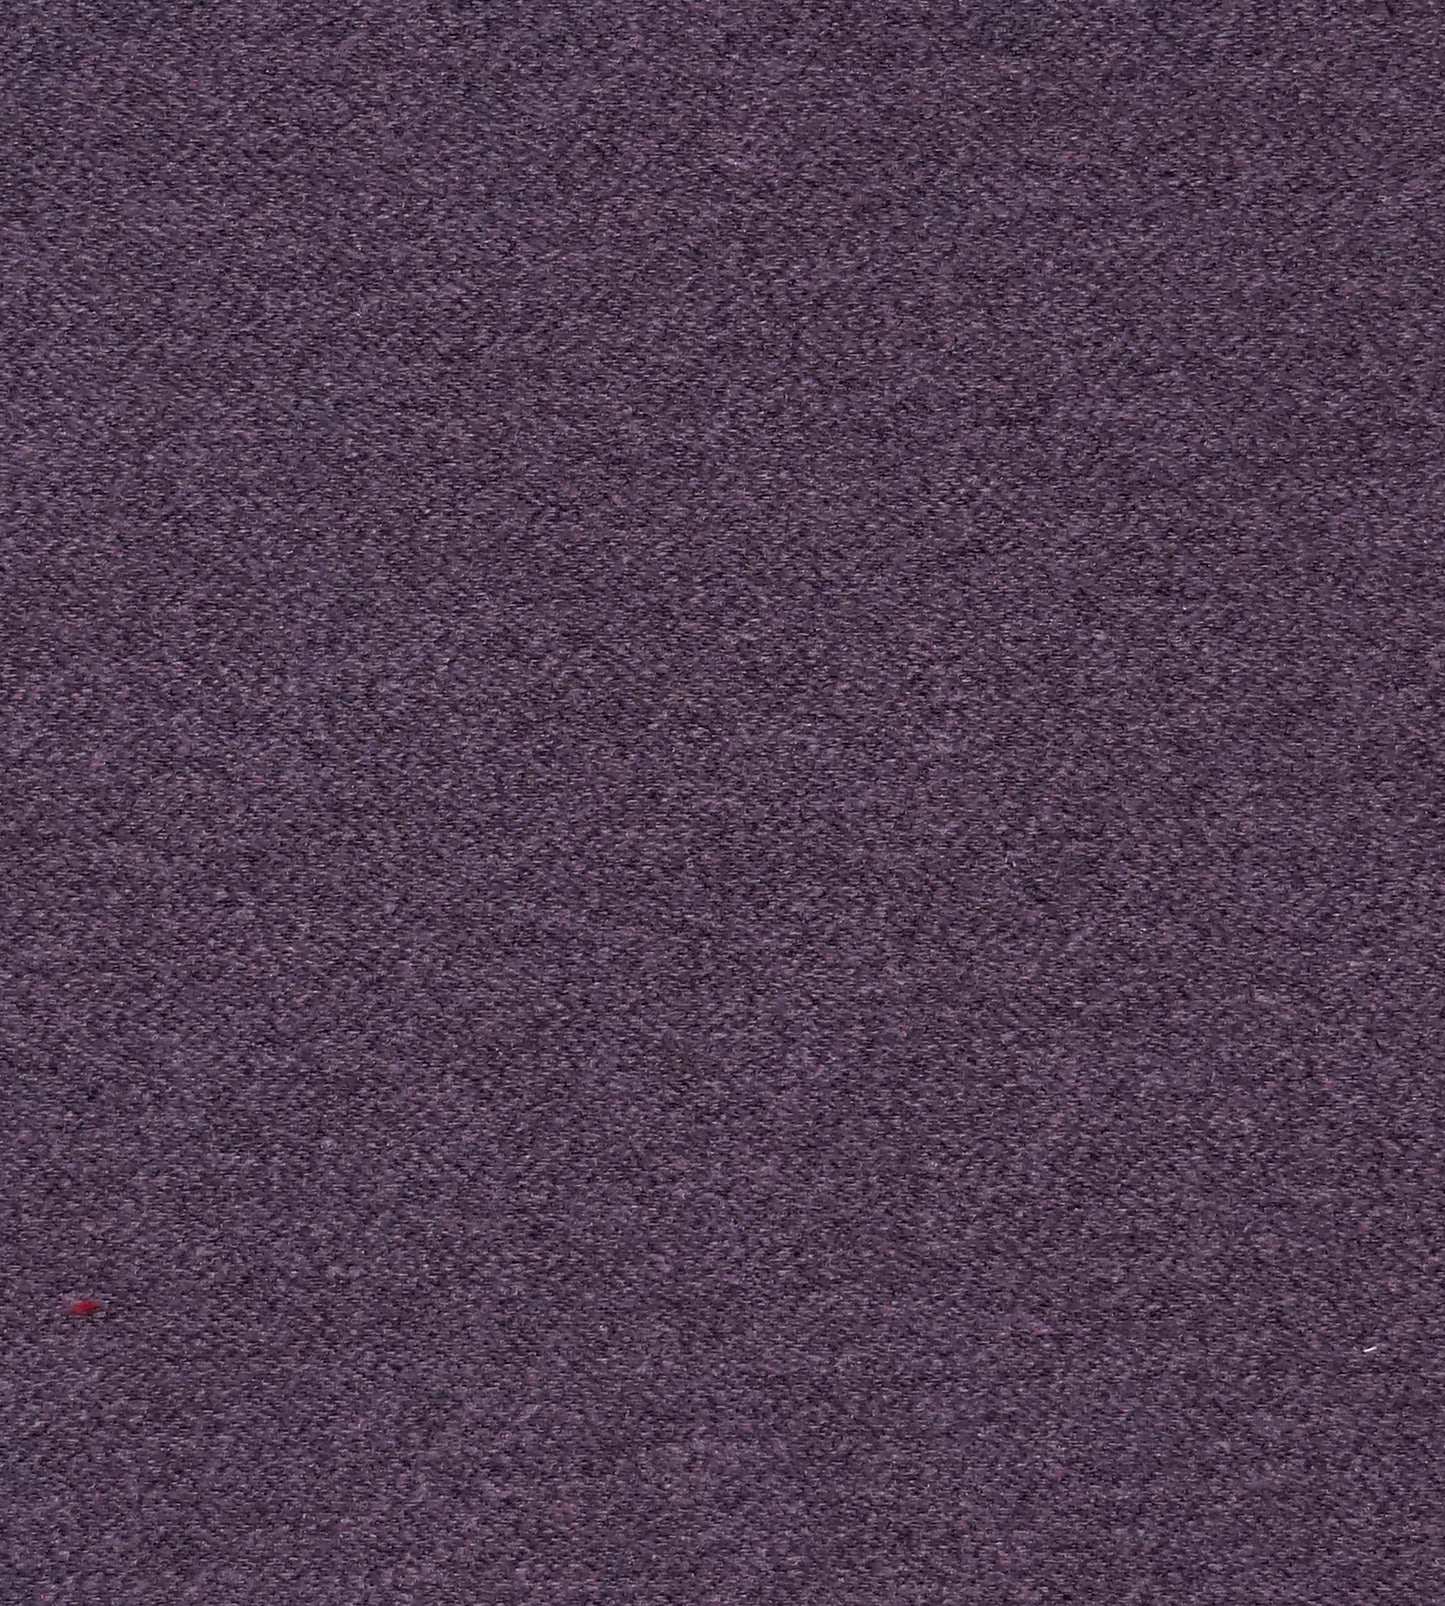 Purchase Scalamandre Fabric Product# SC 001127248, Dapper Flannel Orchid 1